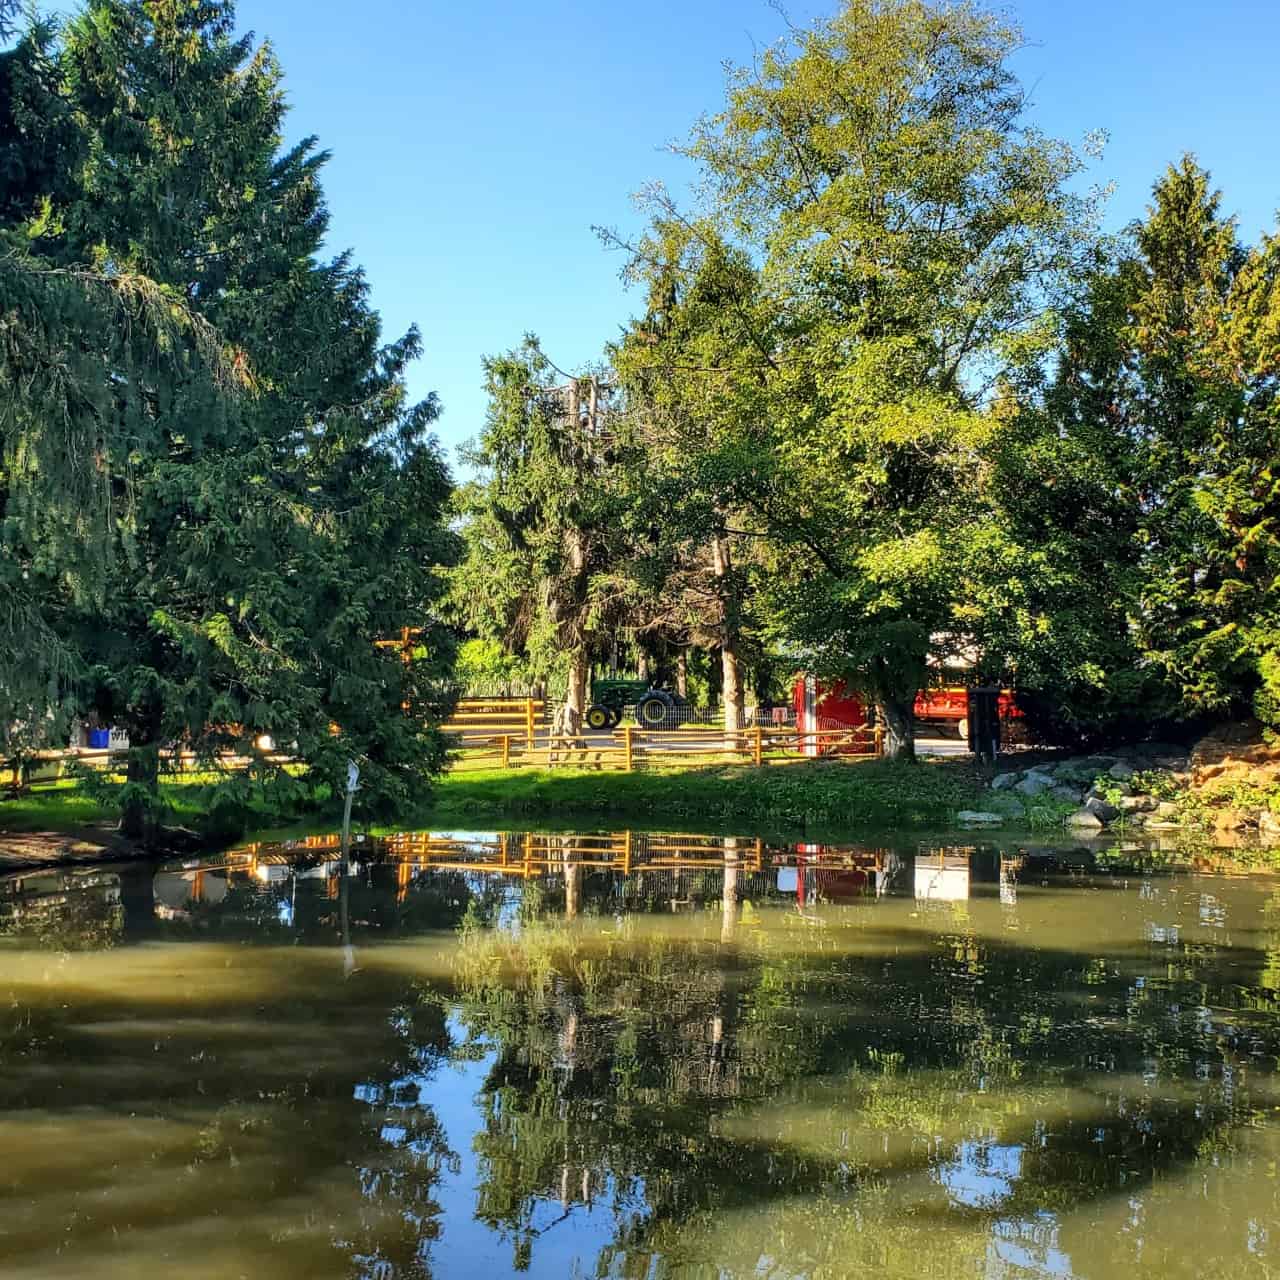 Beautiful entrance to the Richmond Sunflower Festival - This pond with reflections was a lovely transition from parking lot to the fields beyond. Music with a country vibe was playing as we walked to find the miniature train. 